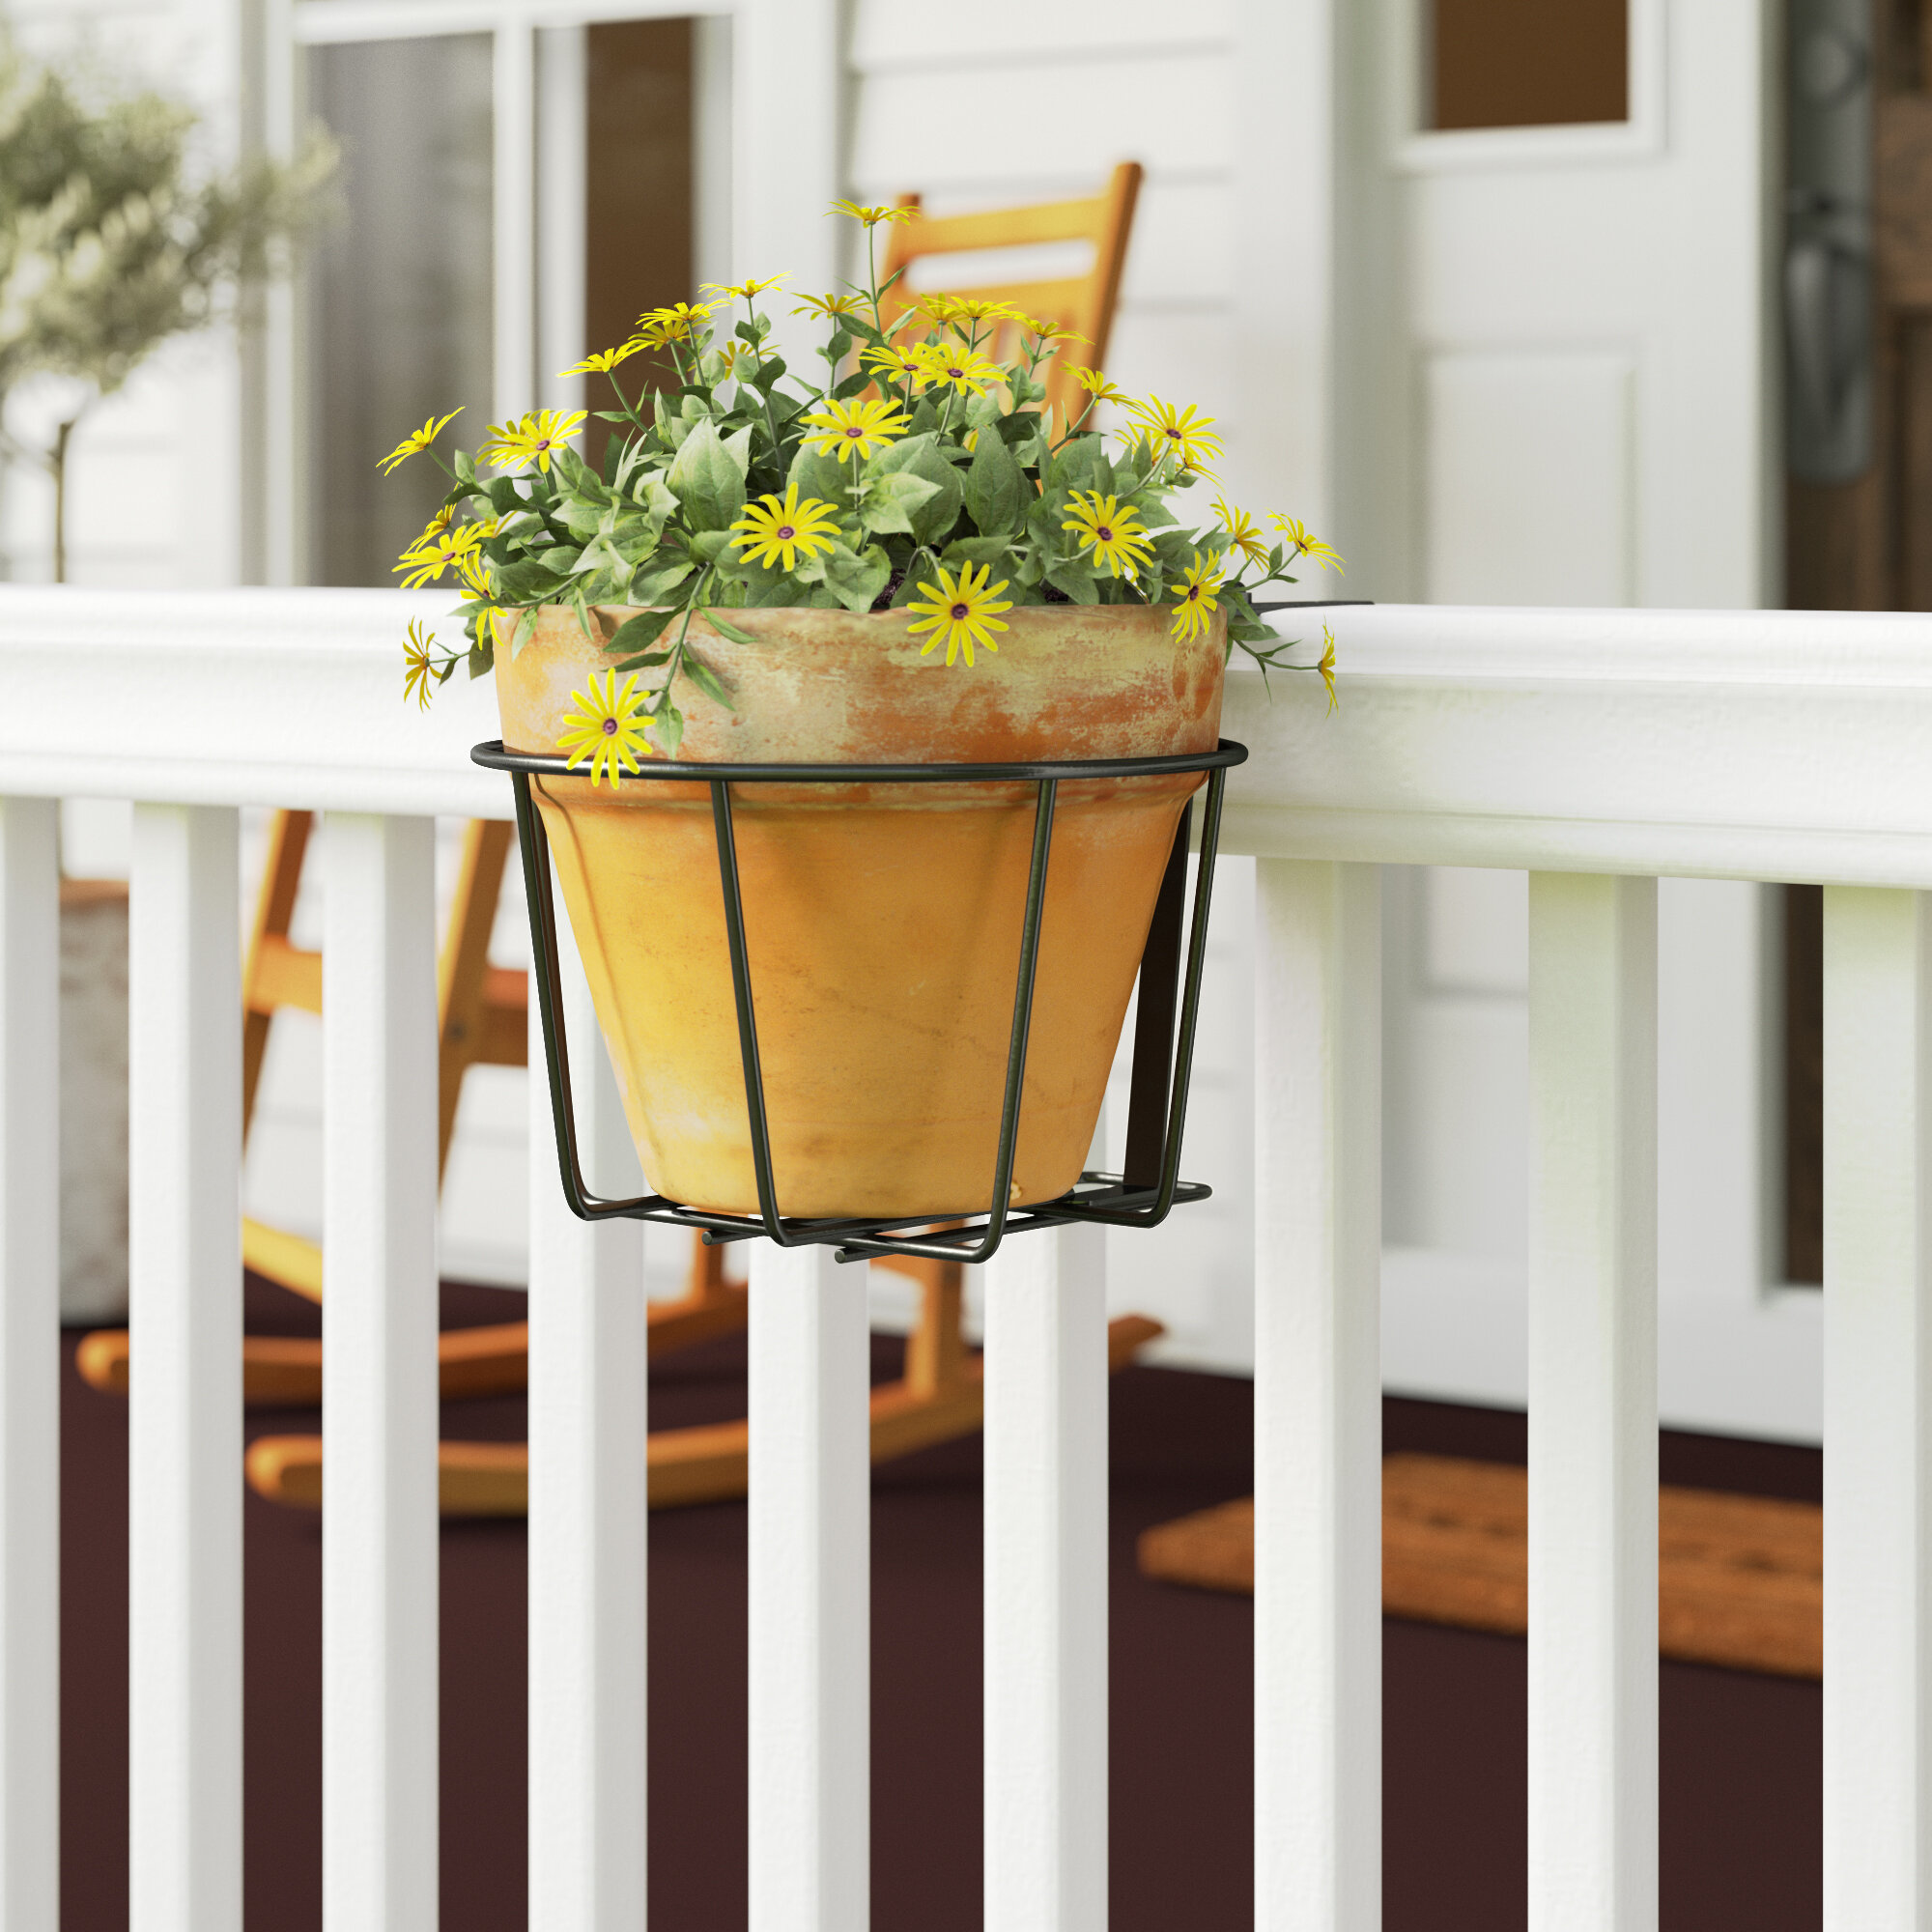 Flower Pot Holder Balcony Plant Baskets Over Deck Rail Planter Hanging Container 